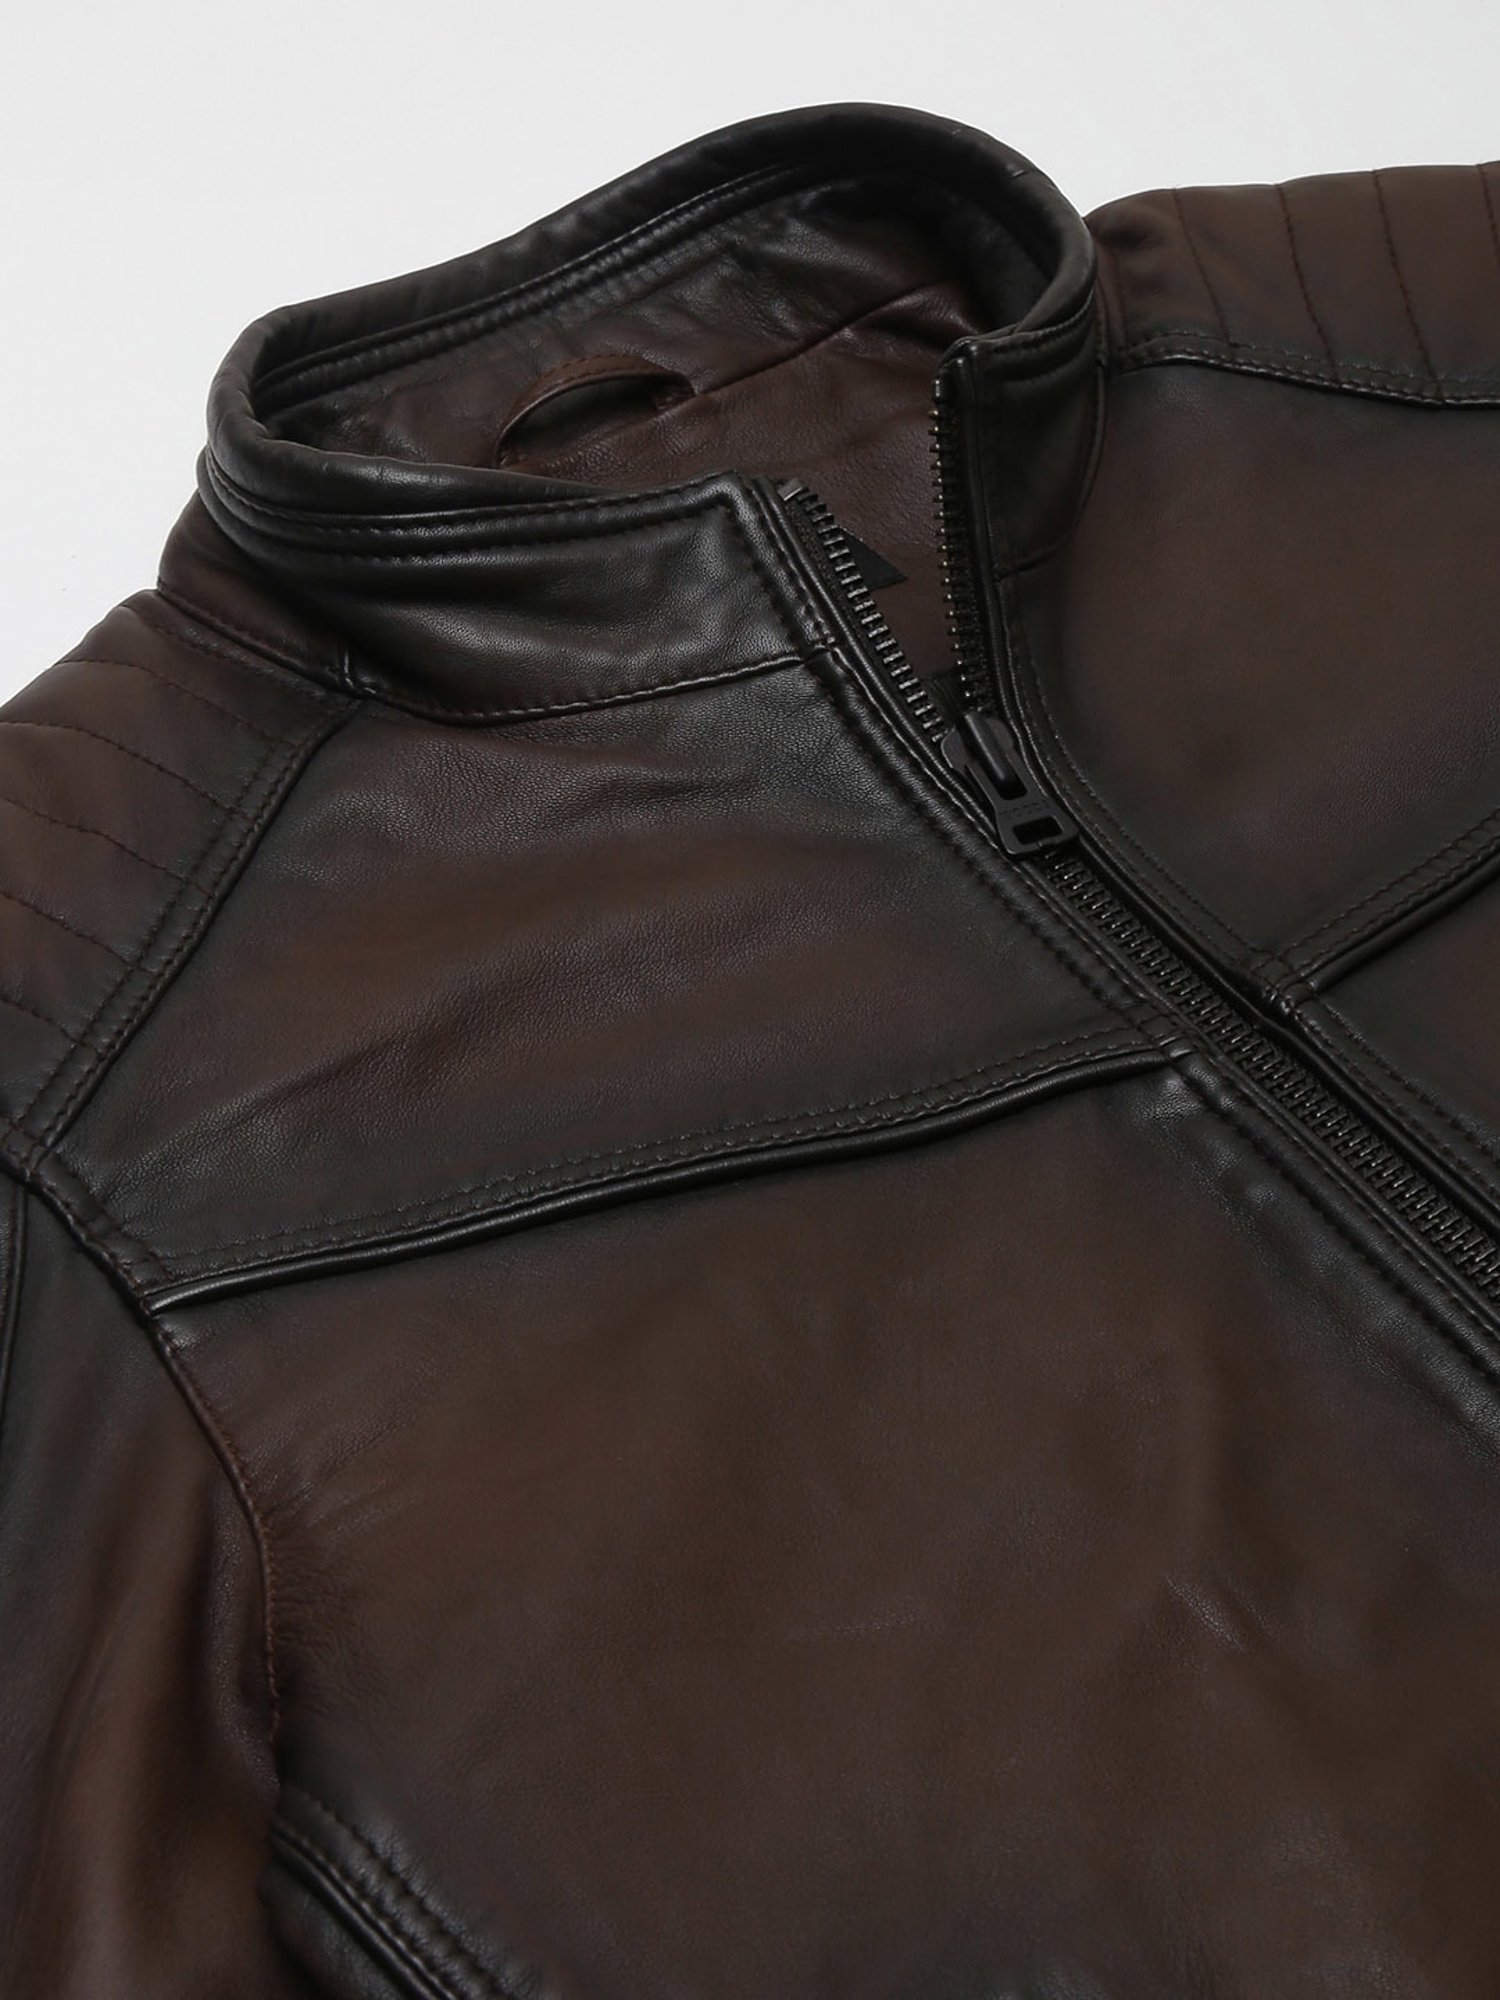 Buy Mens-Biker-Leather-Jacket (Large) at Amazon.in